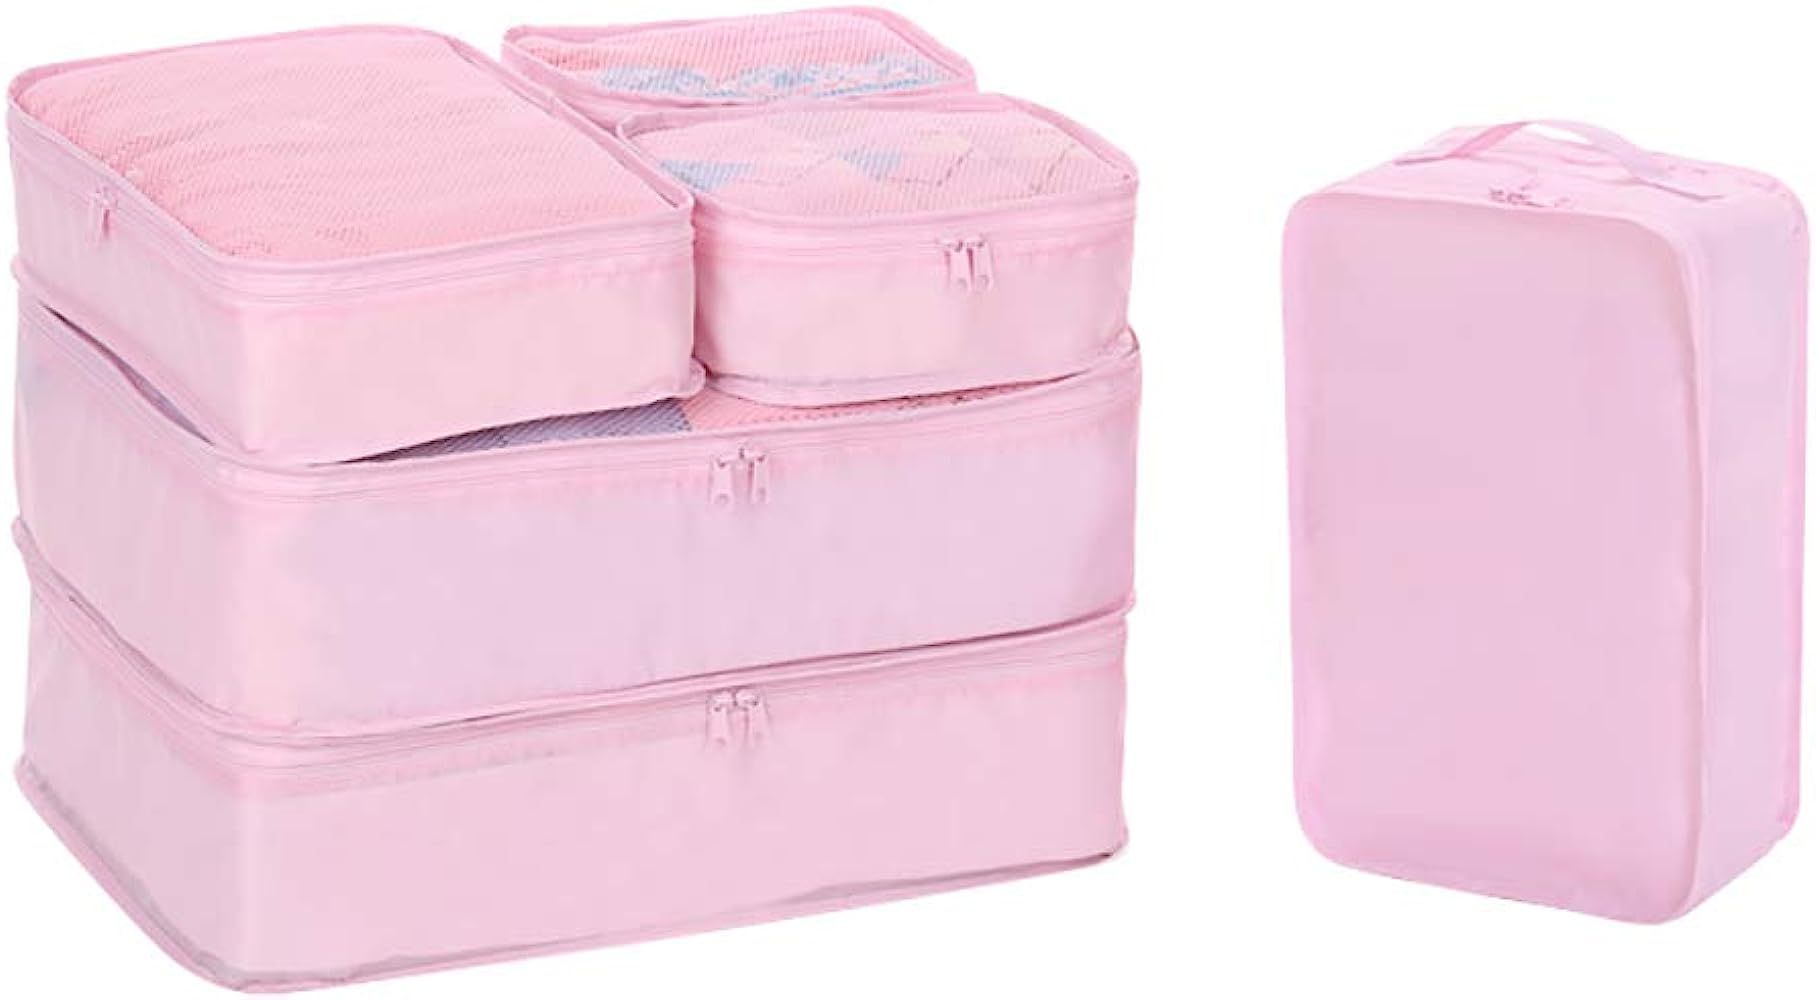 6 Set Travel Packing Cubes, Travel Carry on Luggage Organizer with Shoe Bag (Pink) | Amazon (US)